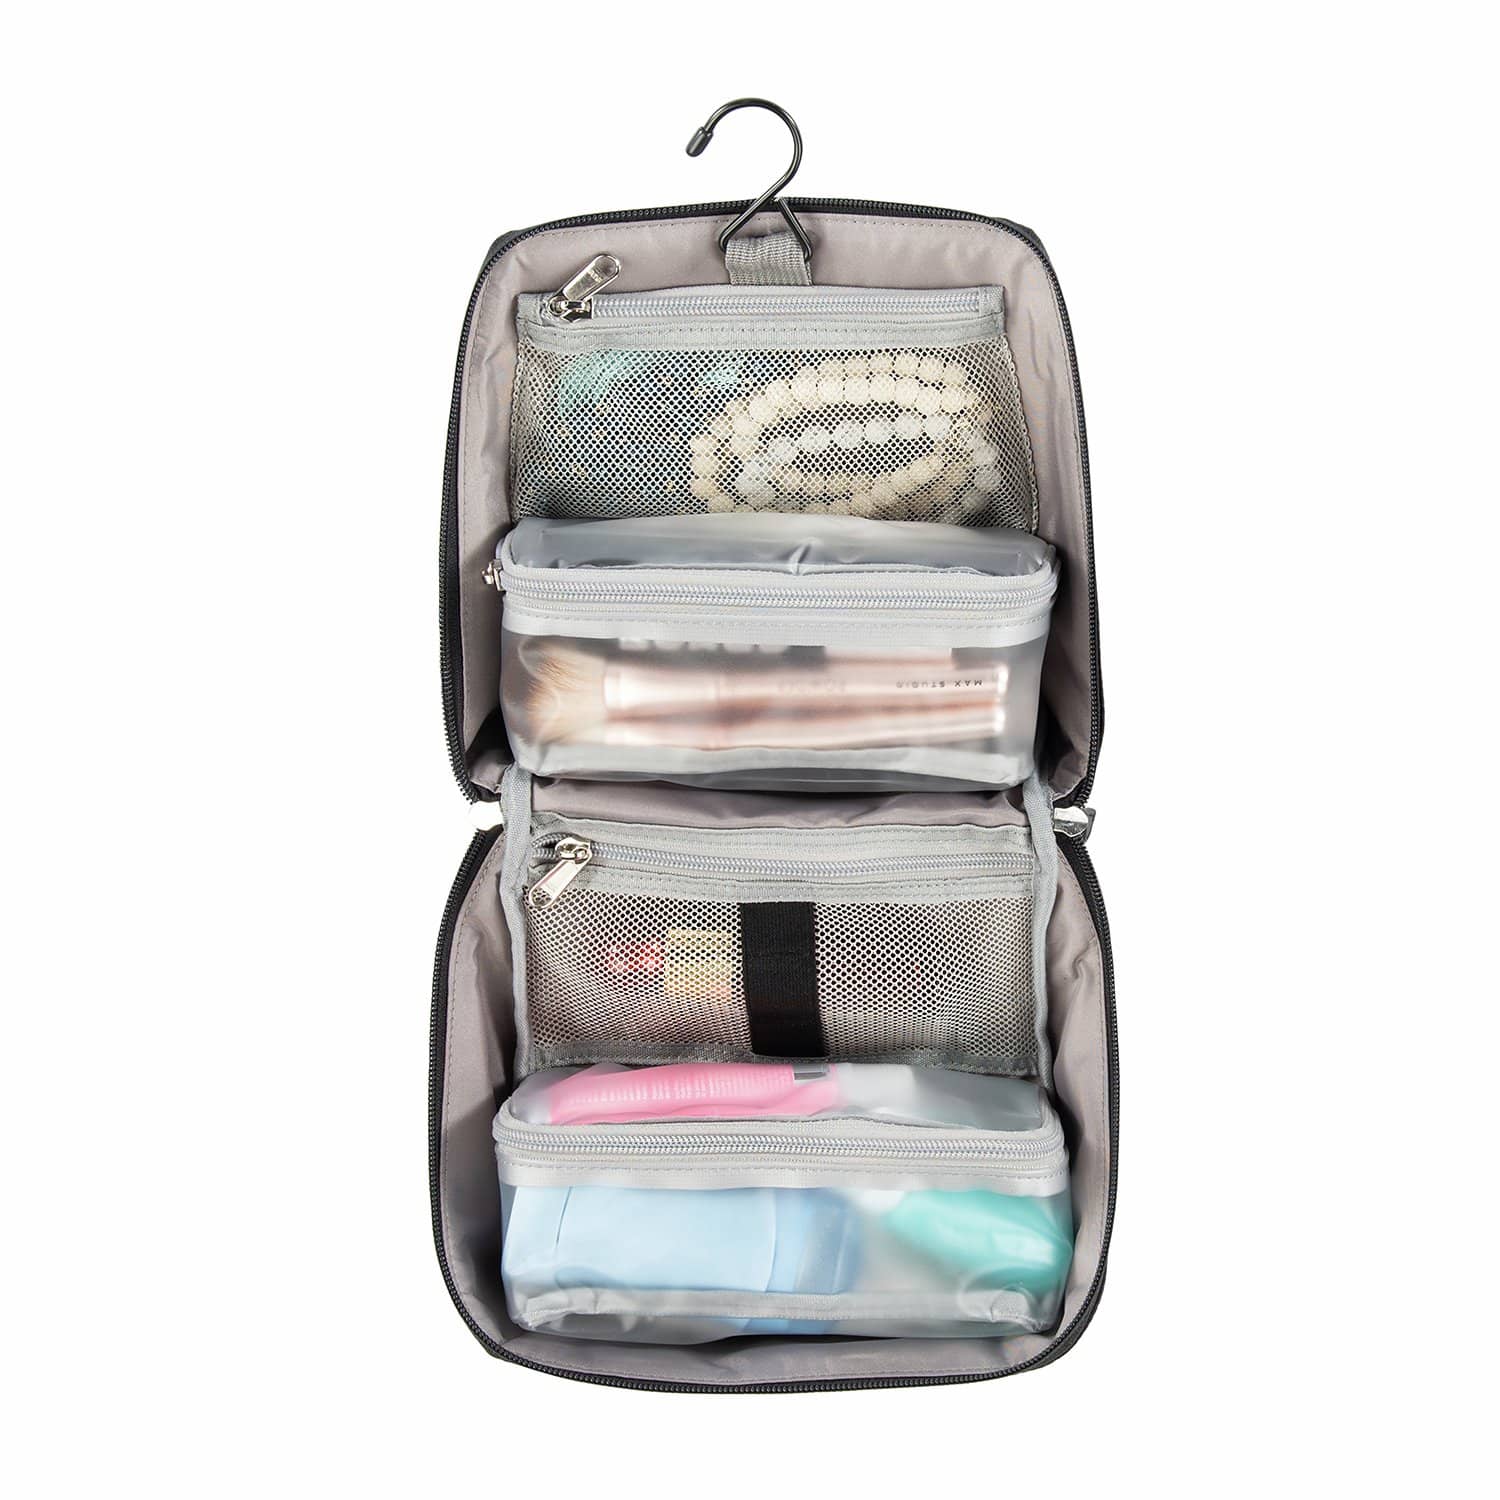 Travelpro Essentials Maxaccess Cubes Deluxe Hanging Toiletry Organizer in Black